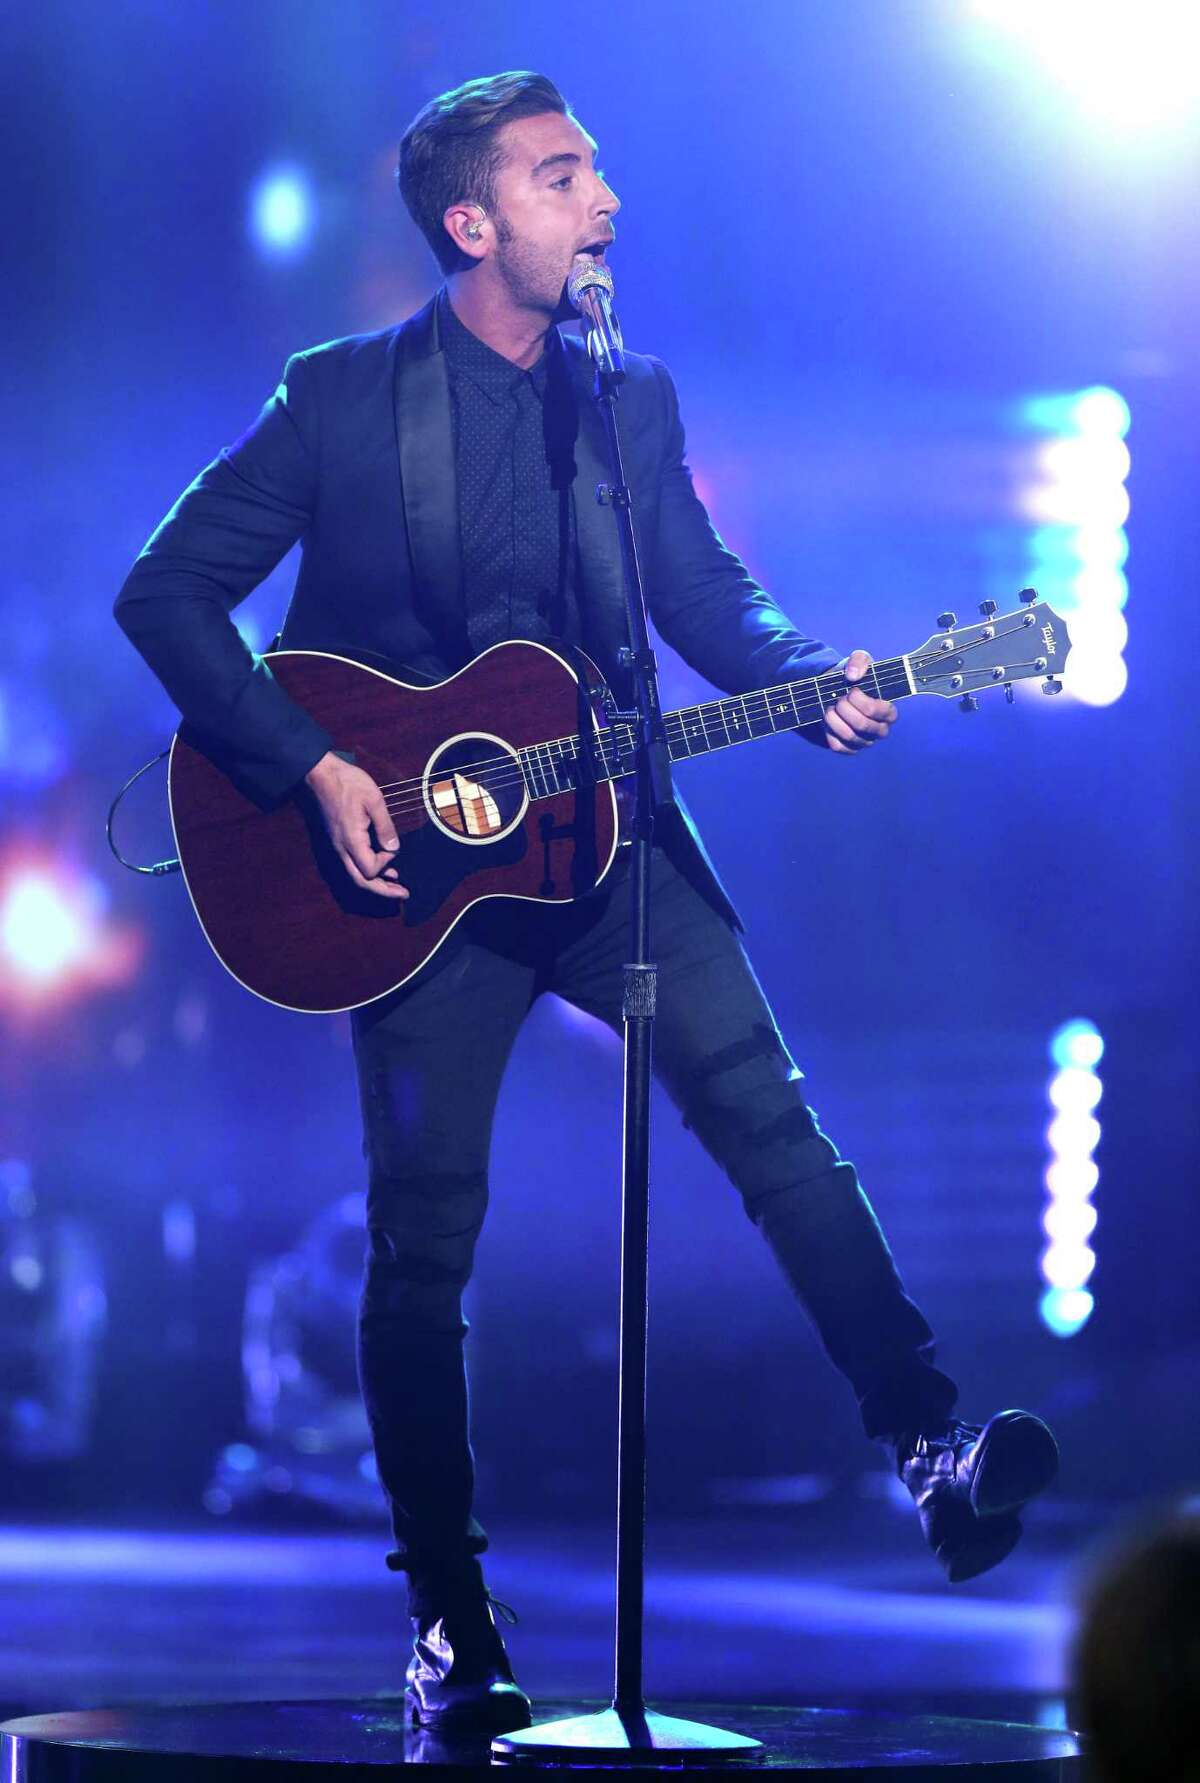 Nick Fradiani performs at the season finale of “American Idol” in 2016.